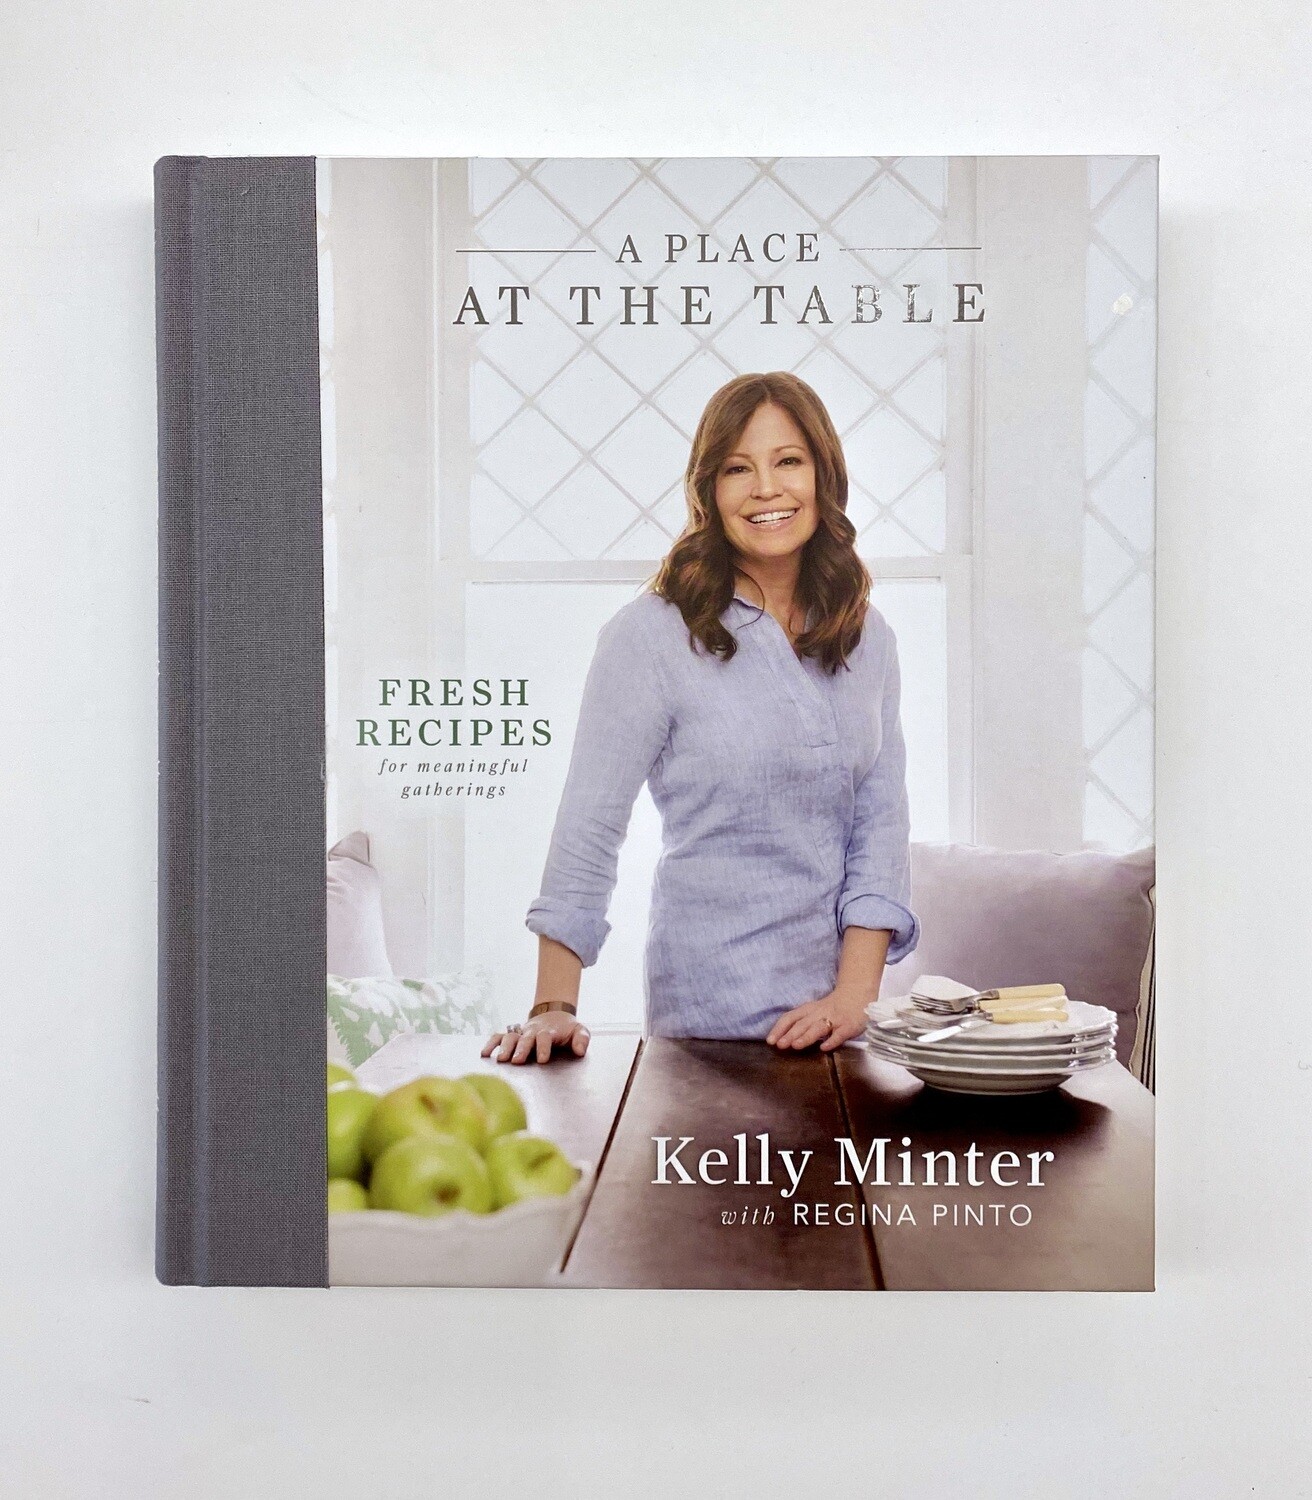 NEW - A Place at the Table: Fresh Recipes for Meaningful Gatherings